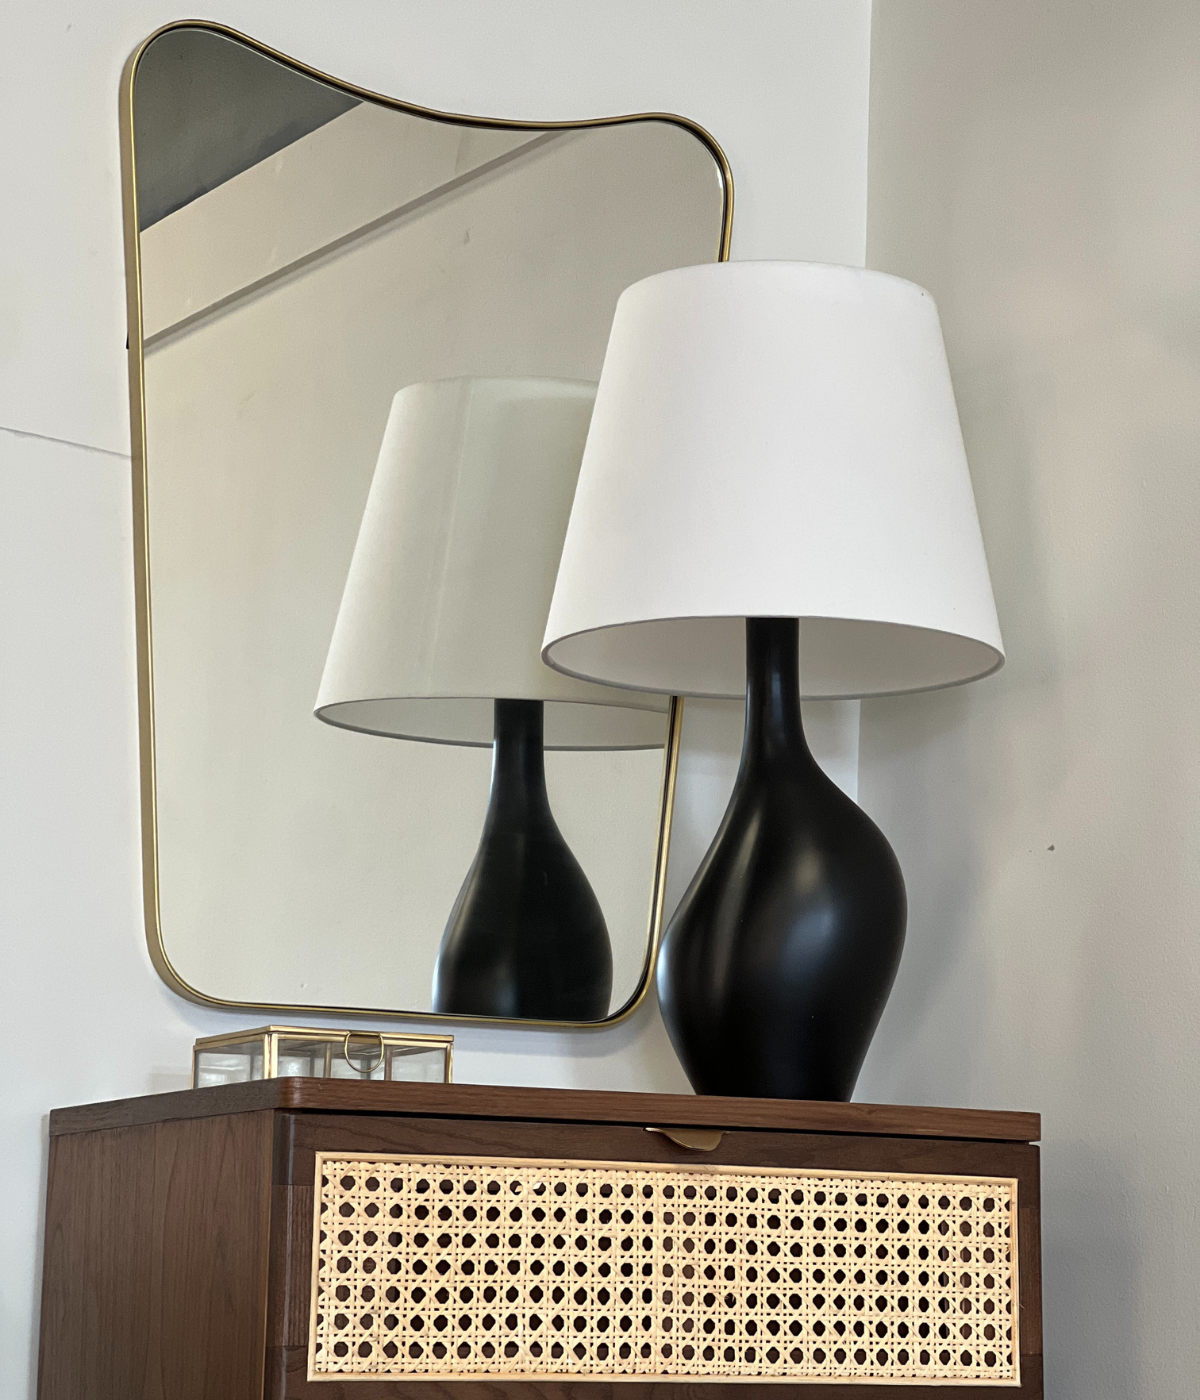 Canberra Table Lamp